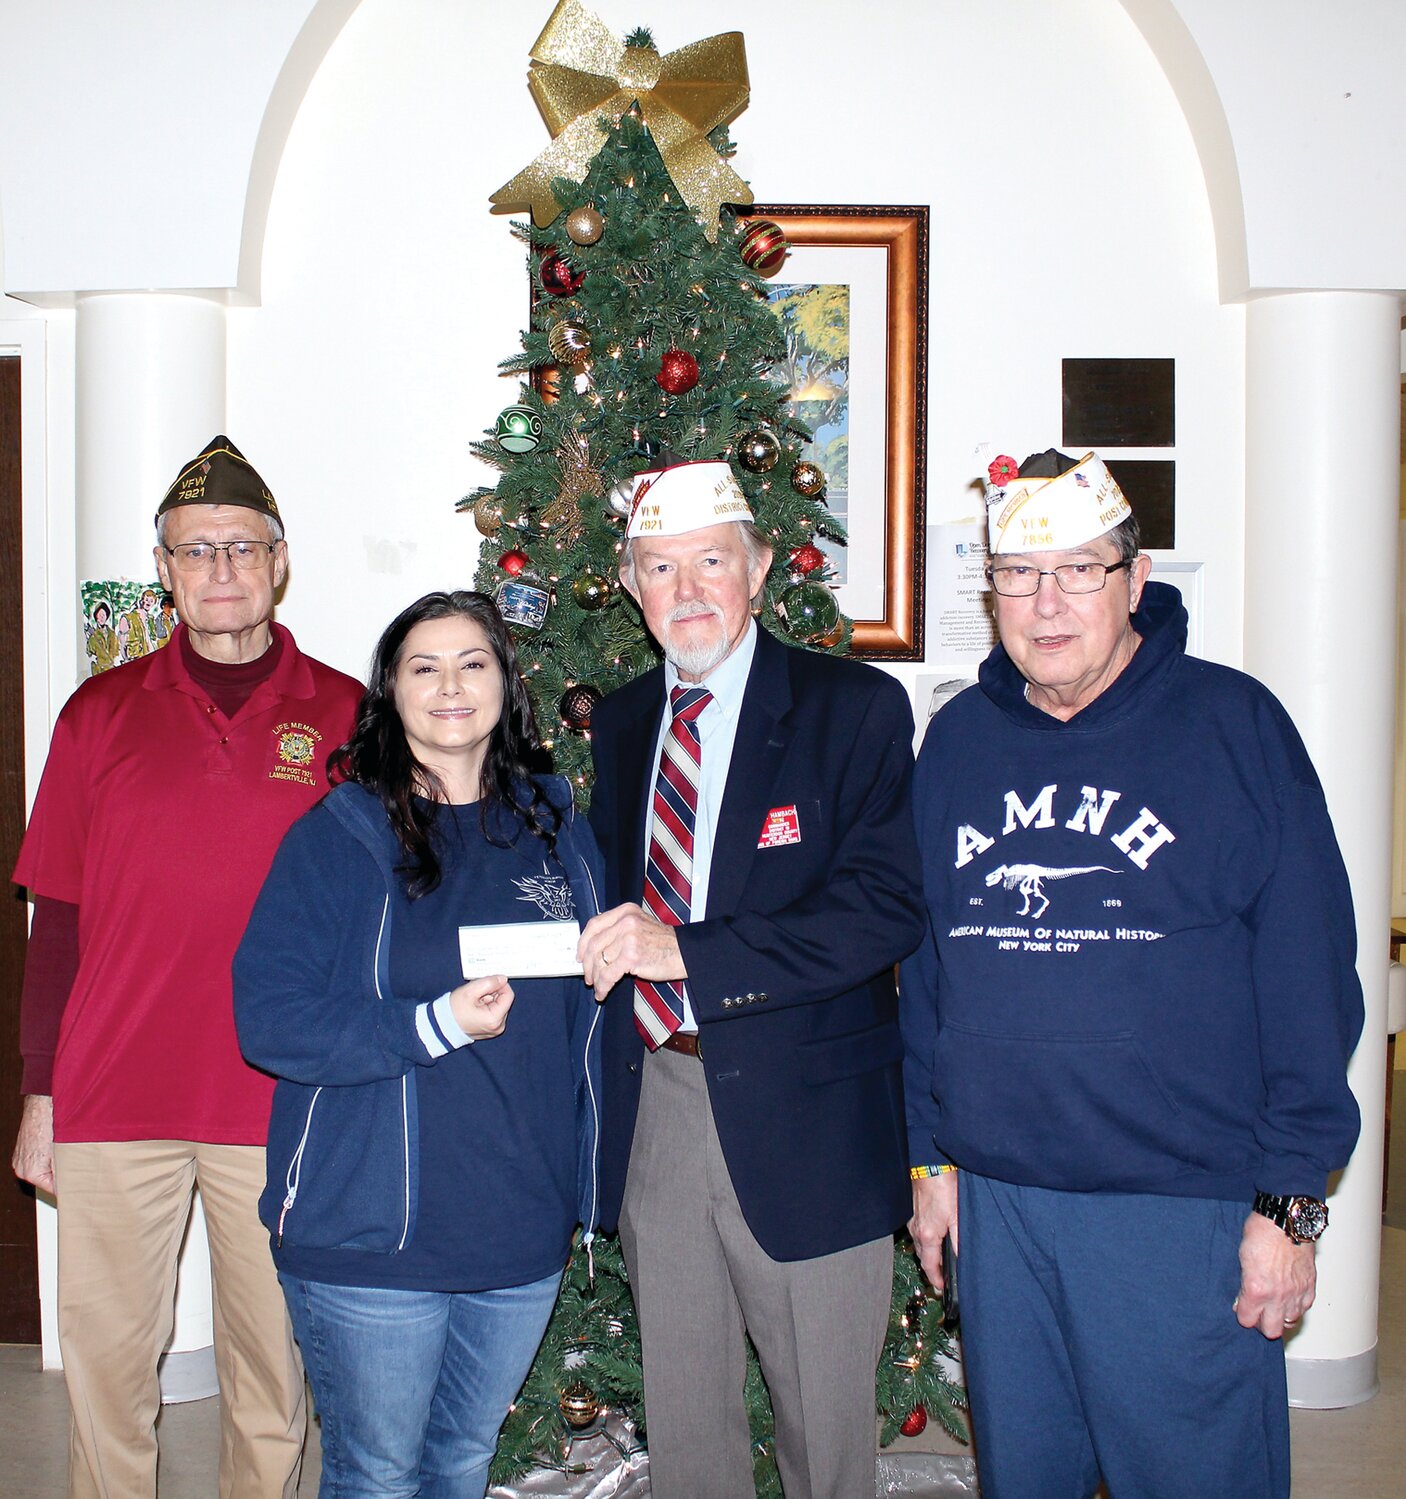 VFW District 19 Commander Georg Hambach presents a check for $2,075 to Cheryl Bade, supervisor of human services for the Veterans Haven North facility in Glen Gardner, N.J. They are flanked by District Quartermaster John Cuprzinski, left, and District Senior Vice Commander Gerry Cadwaller, right.